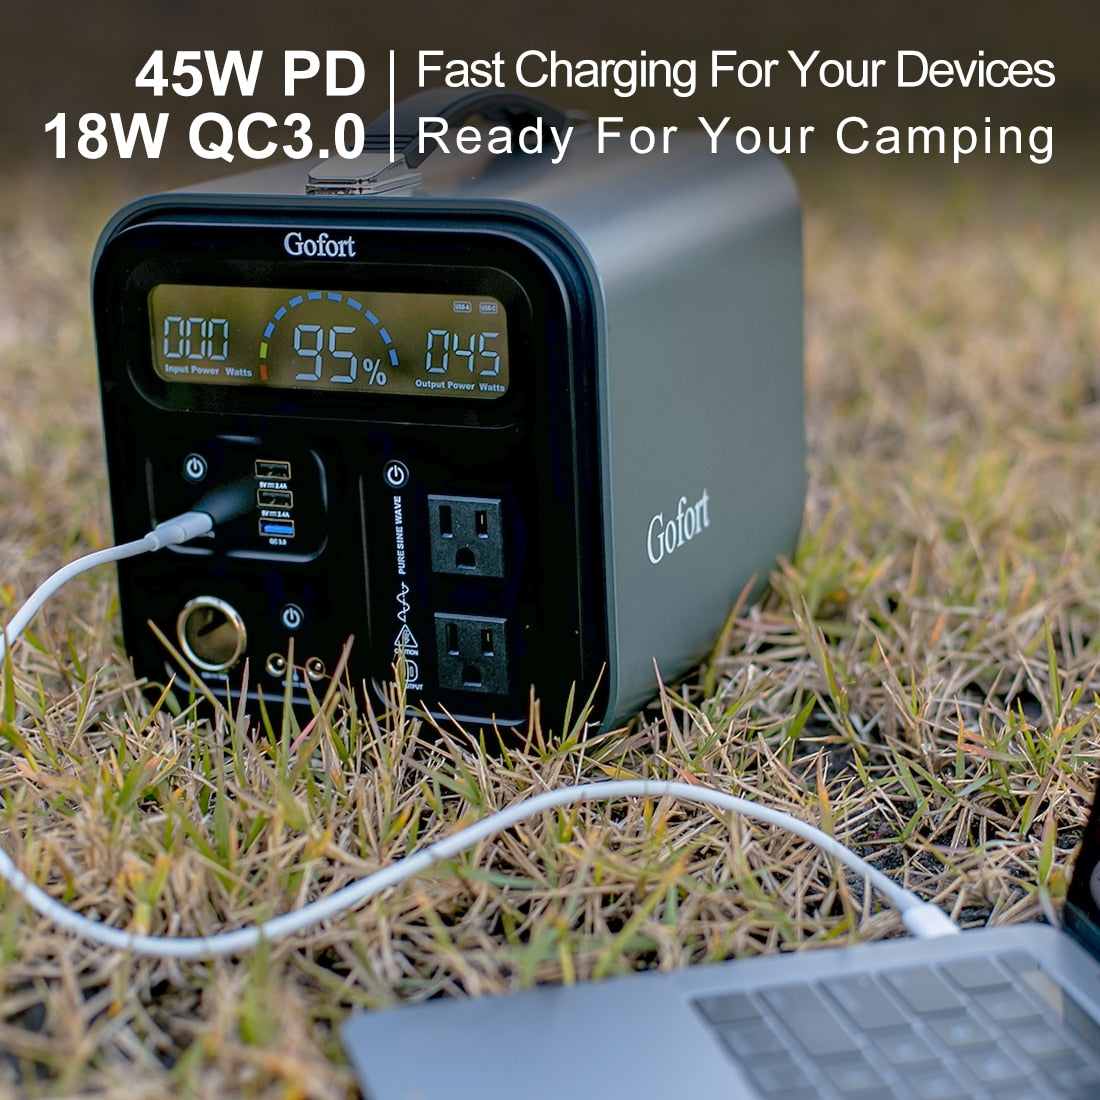 PD Fast Charging For Your Devices 18W QC3.